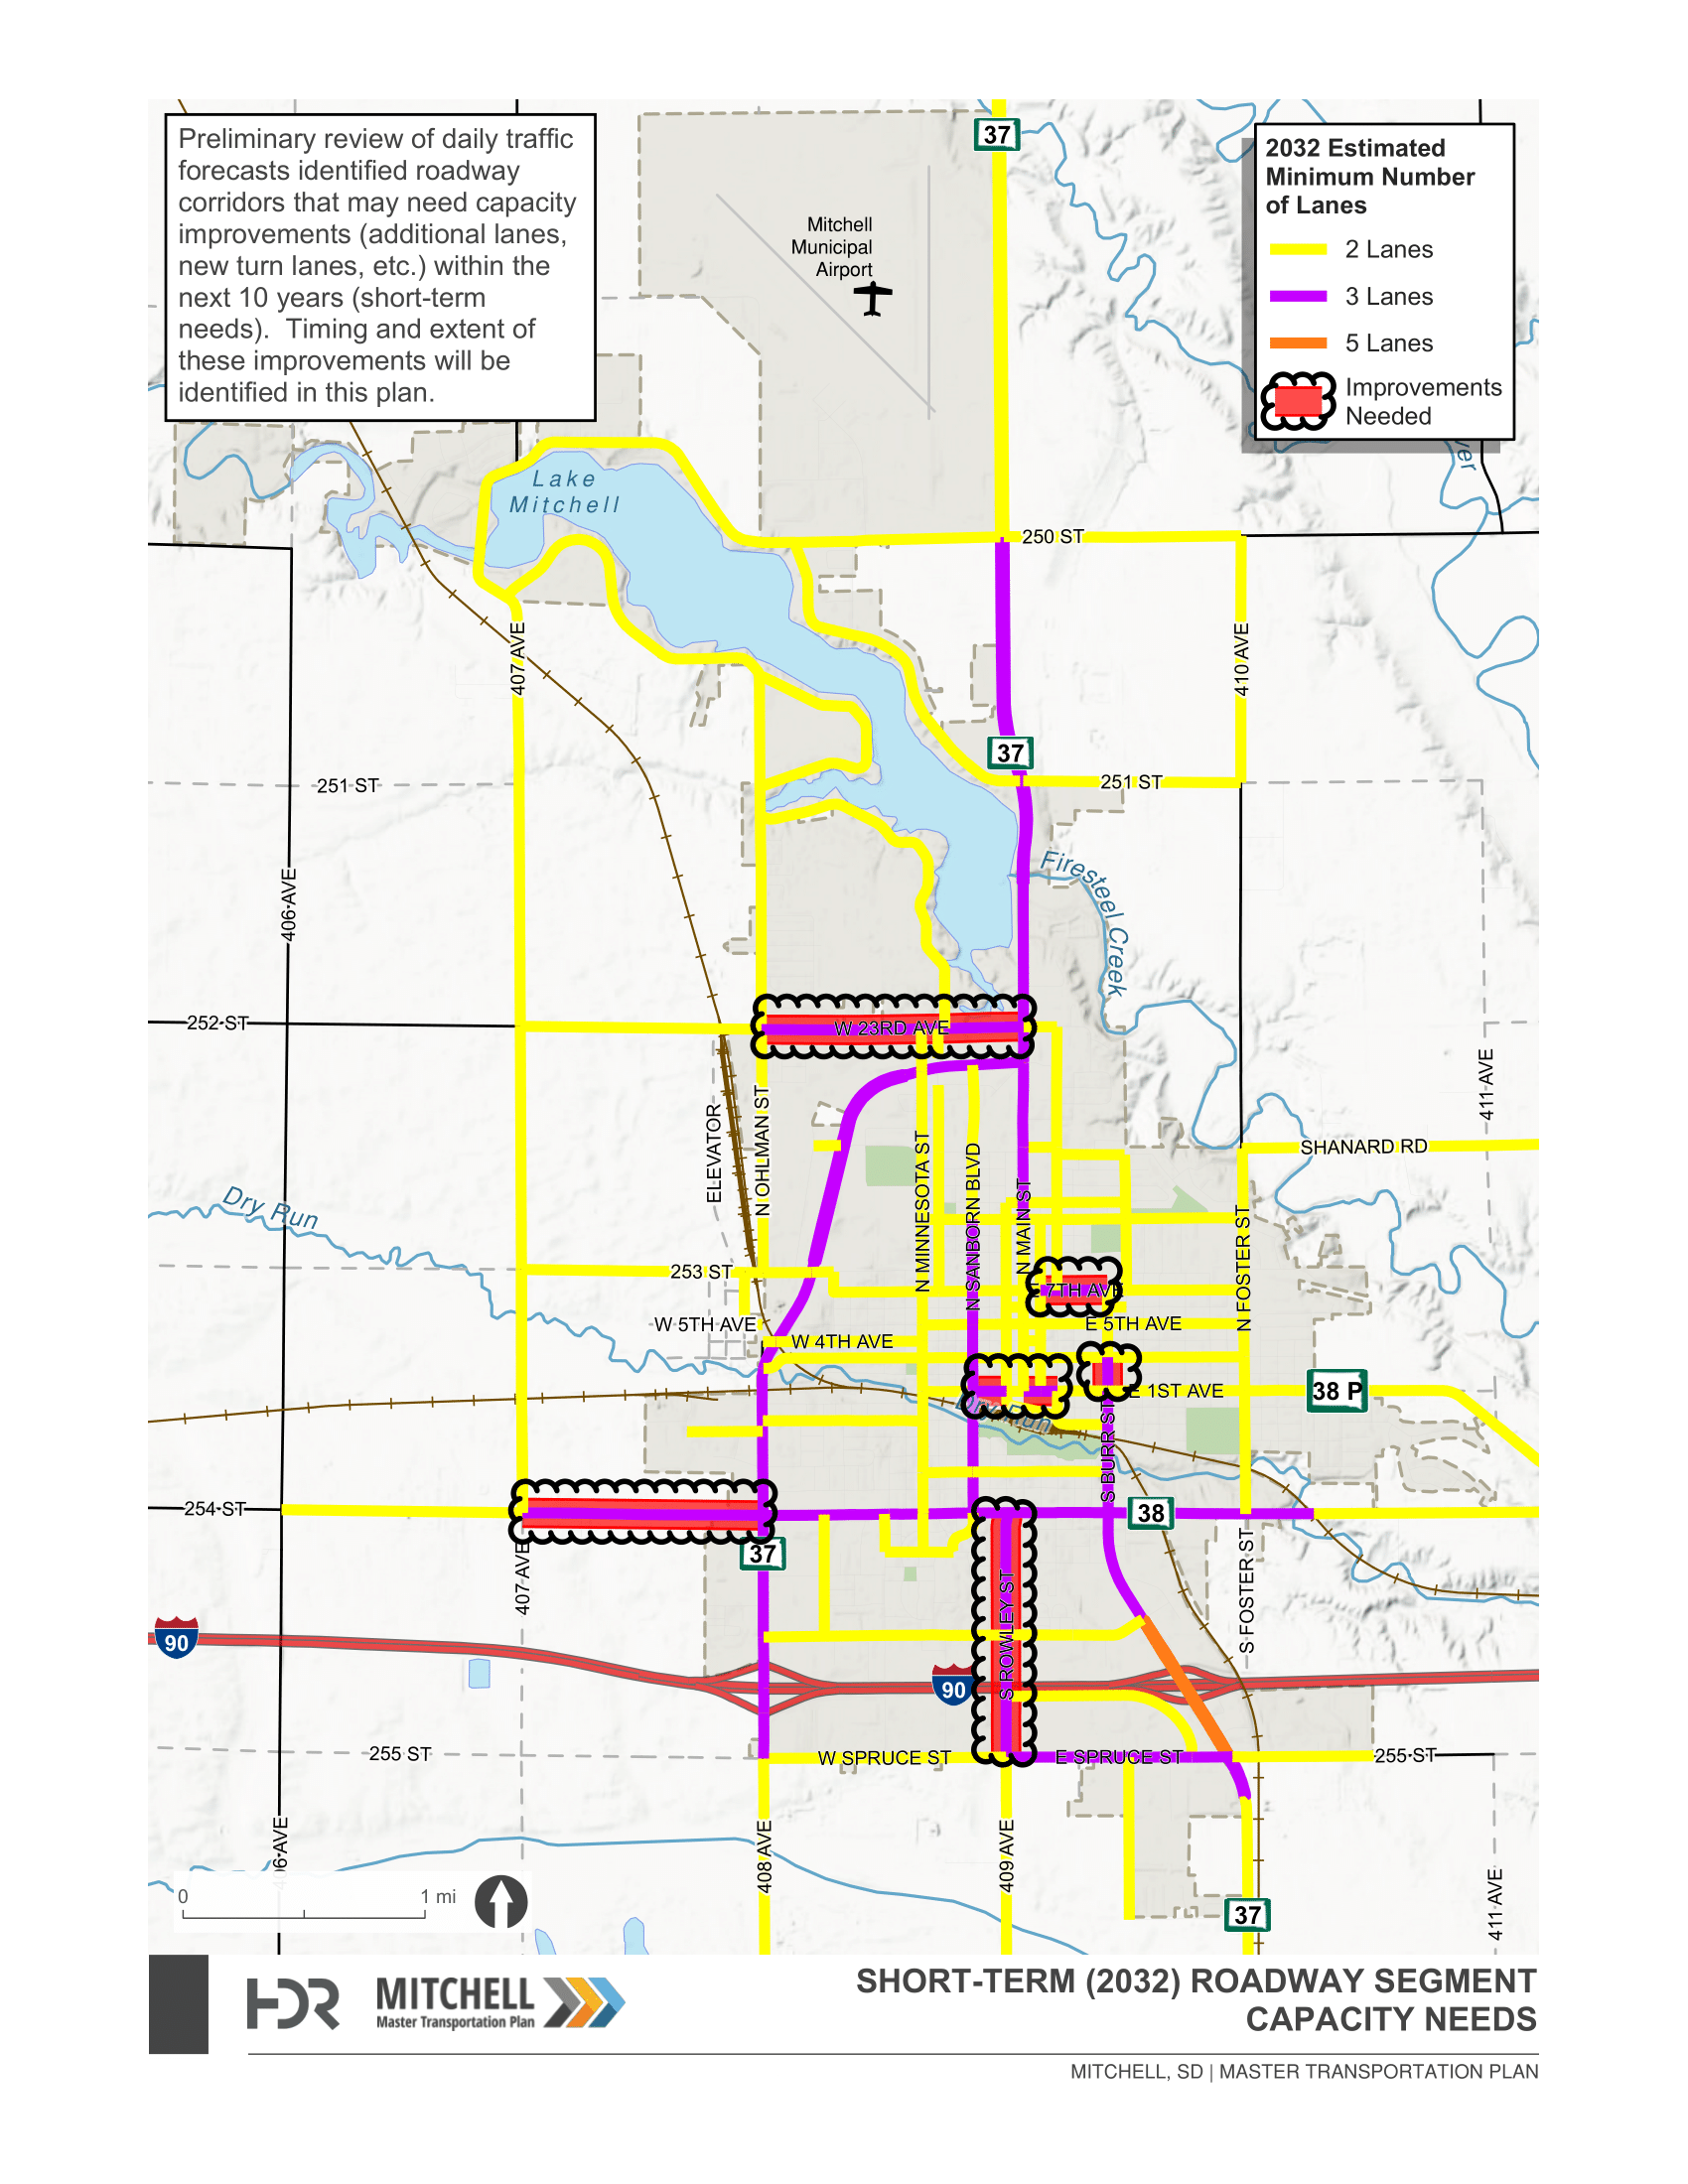 Summary of potential roadway improvement needs in terms of ‘number of lanes’ along a roadway segment based on forecasted traffic volumes.  Roadway segments with a thick red outline reflect short-term needs for additional lanes based on anticipated traffic growth and development over the next 10 years.  